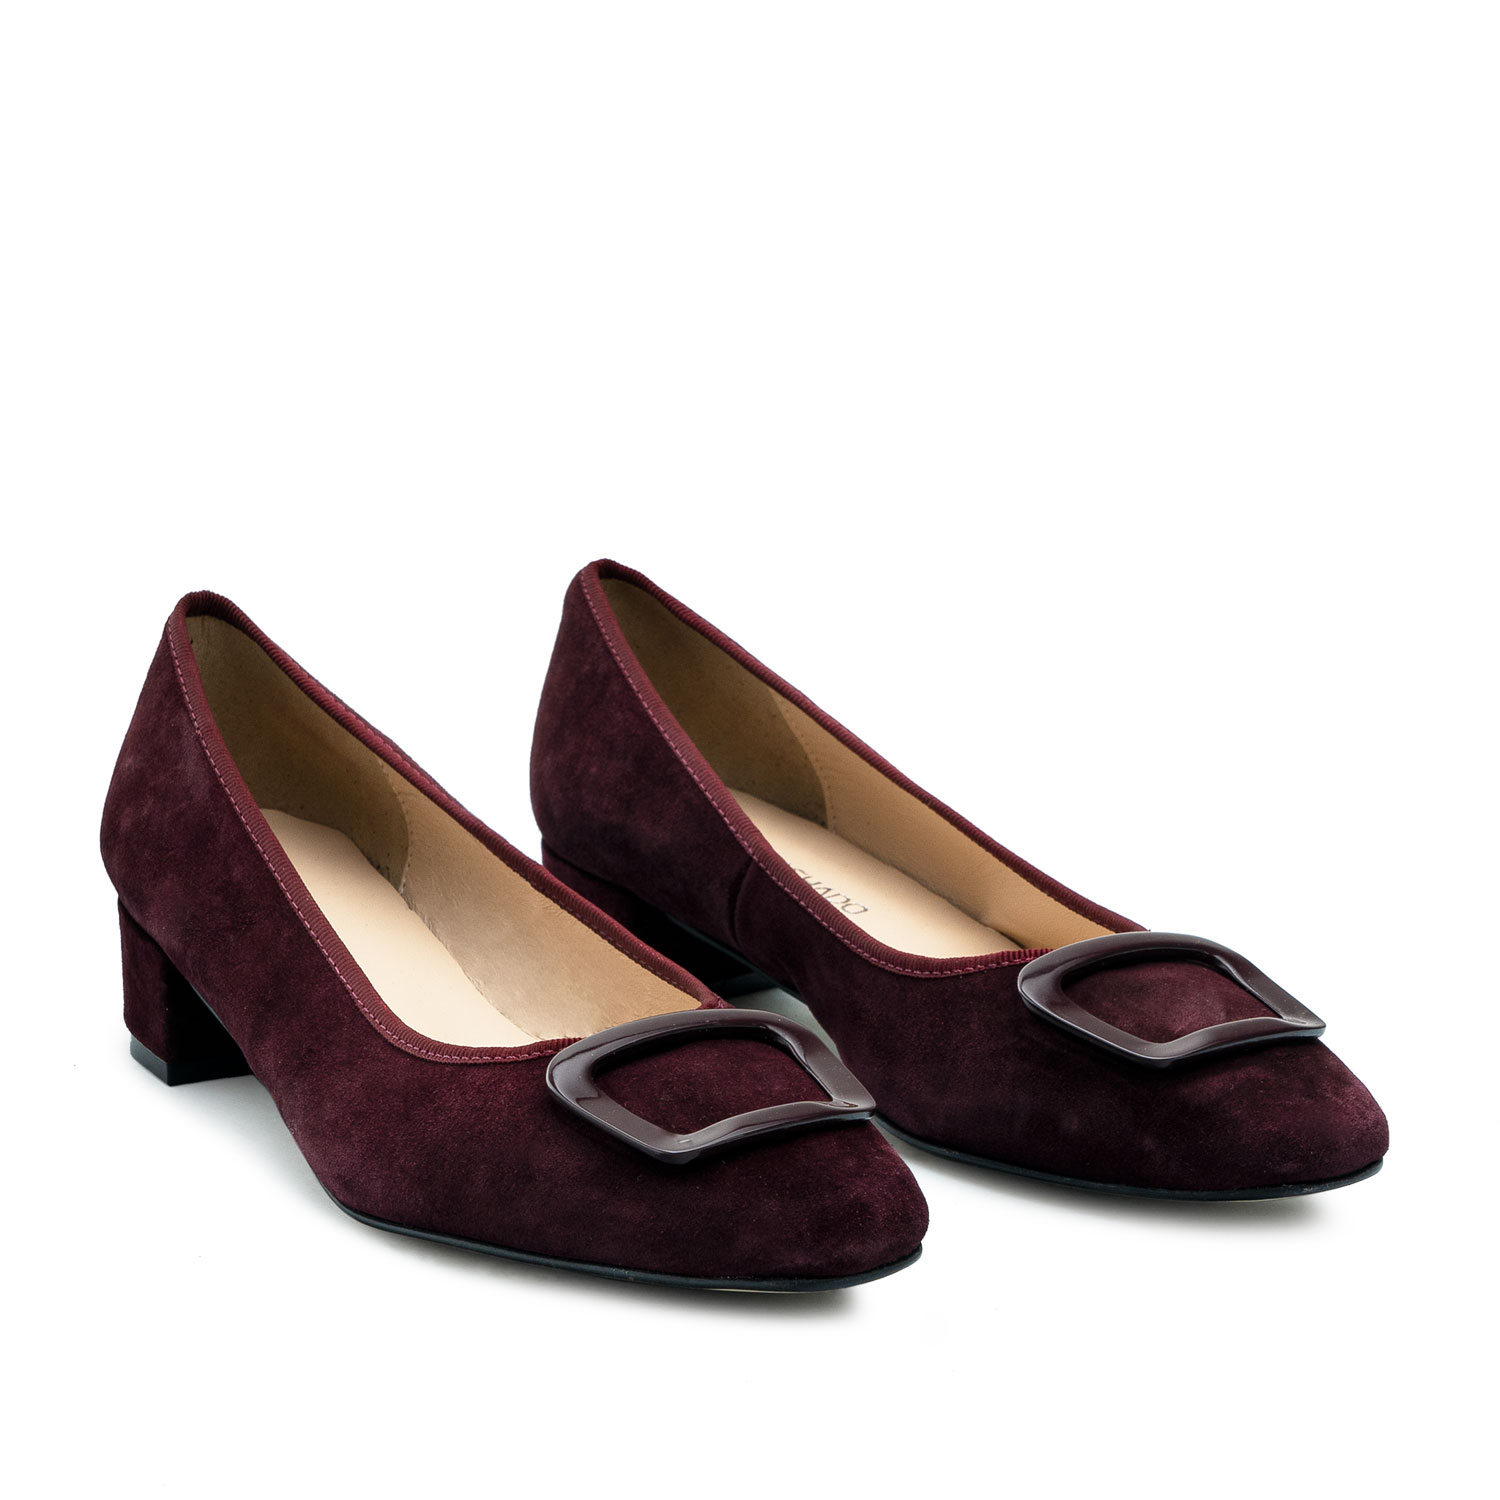 Heeled Shoes in Burgundy Split leather 